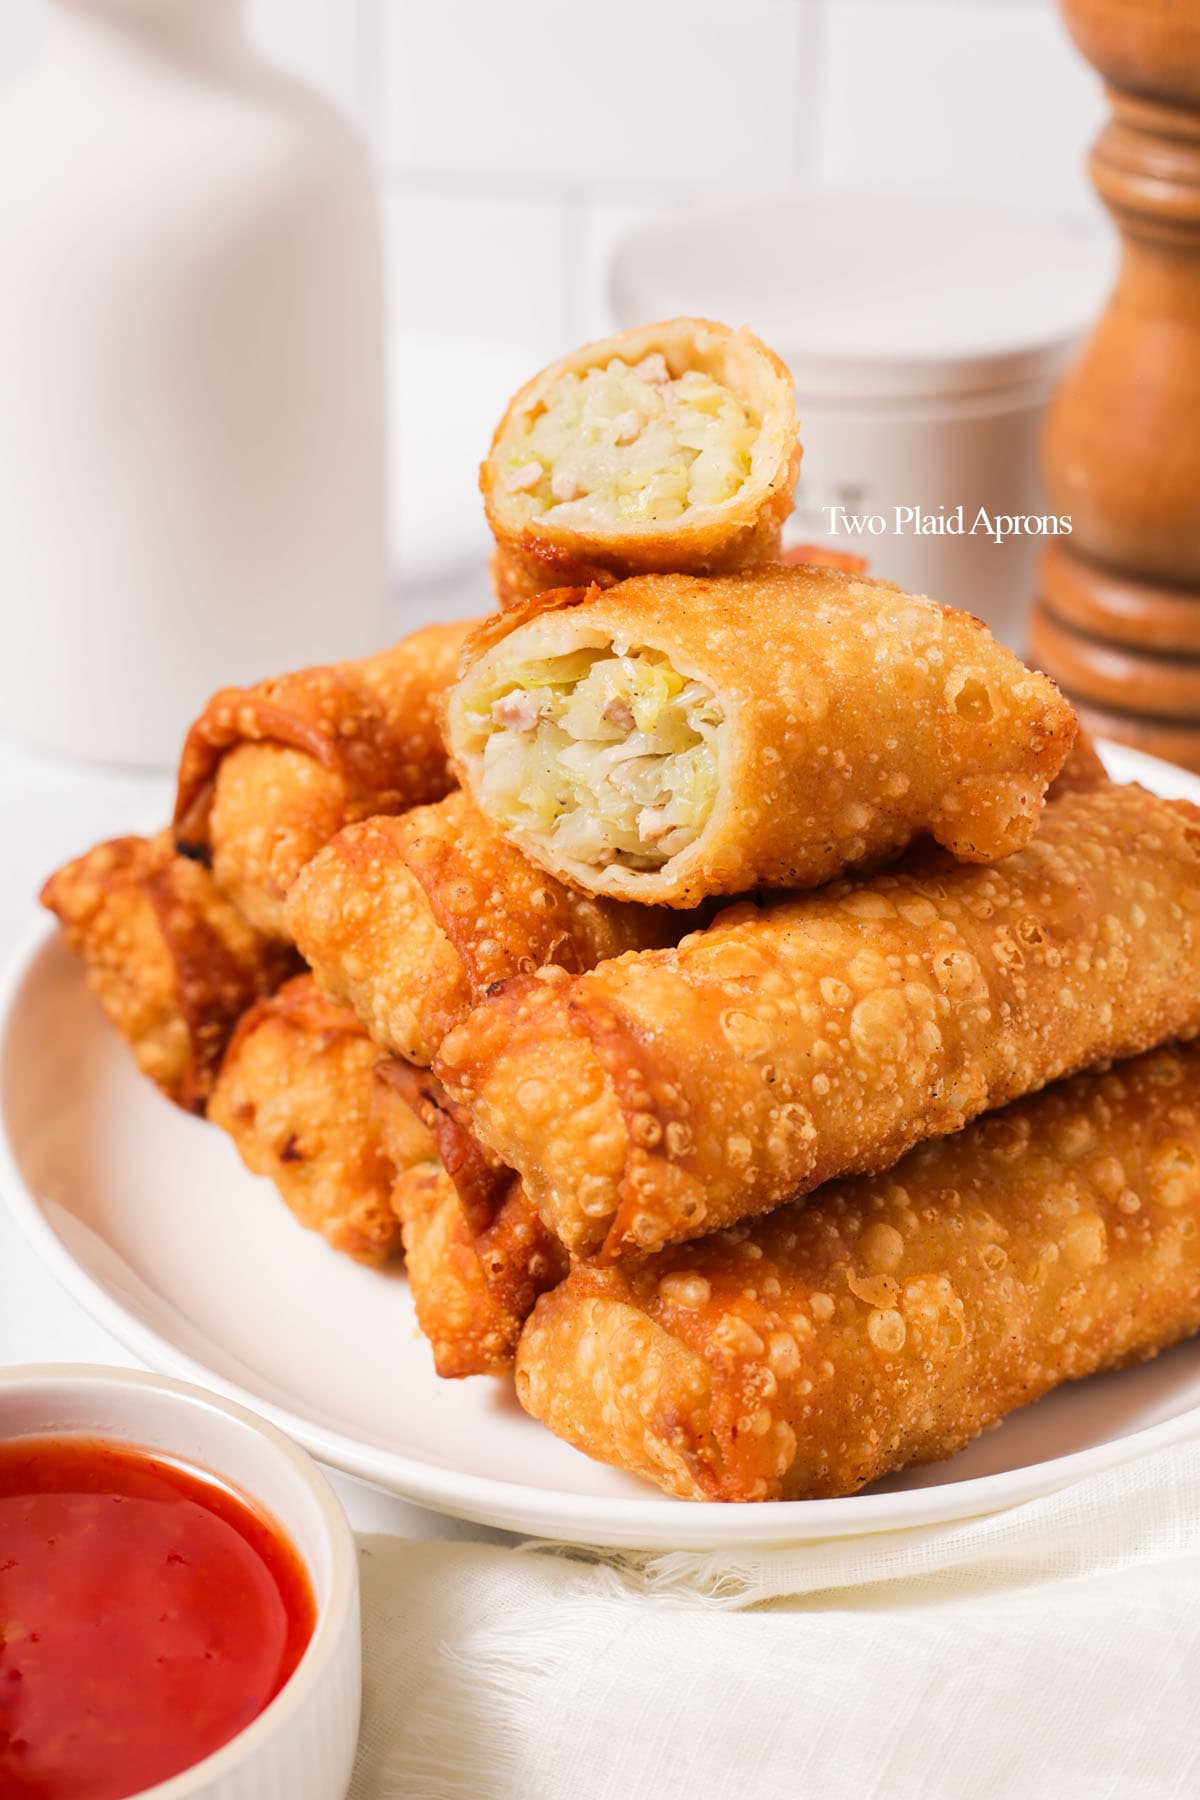 Showing the inside of Chinese egg rolls.